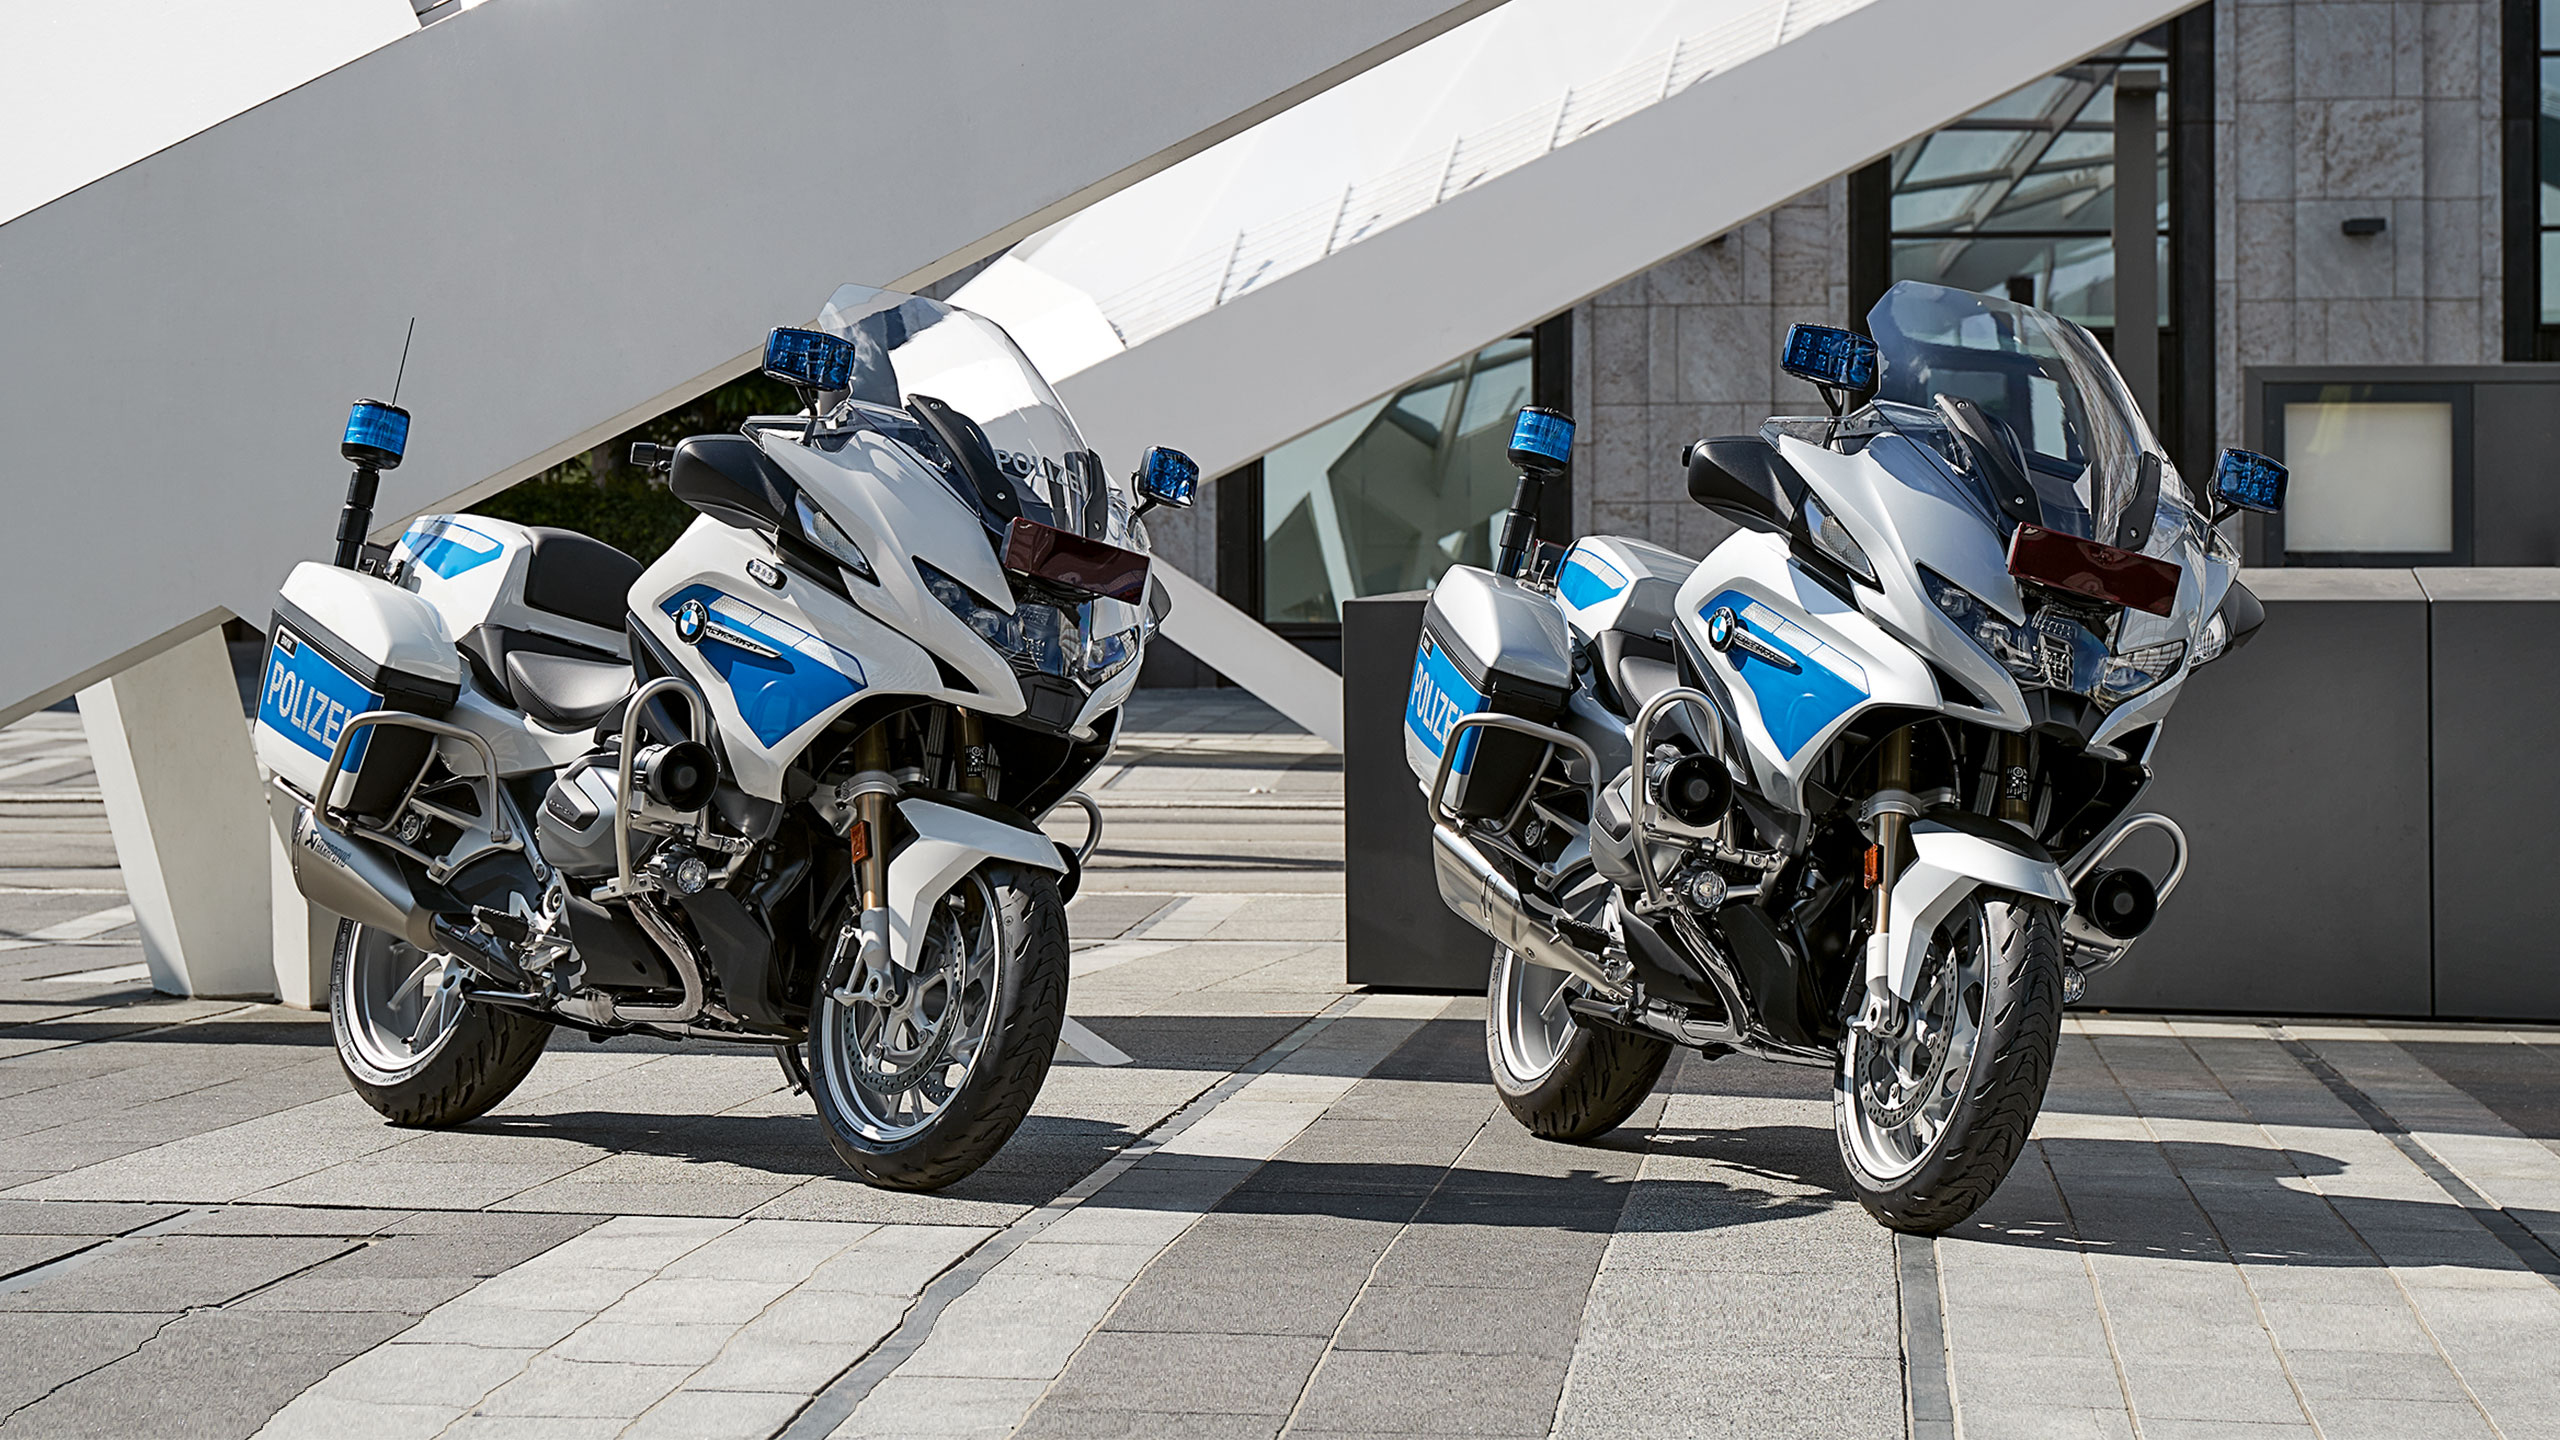 bmw police motorcycle